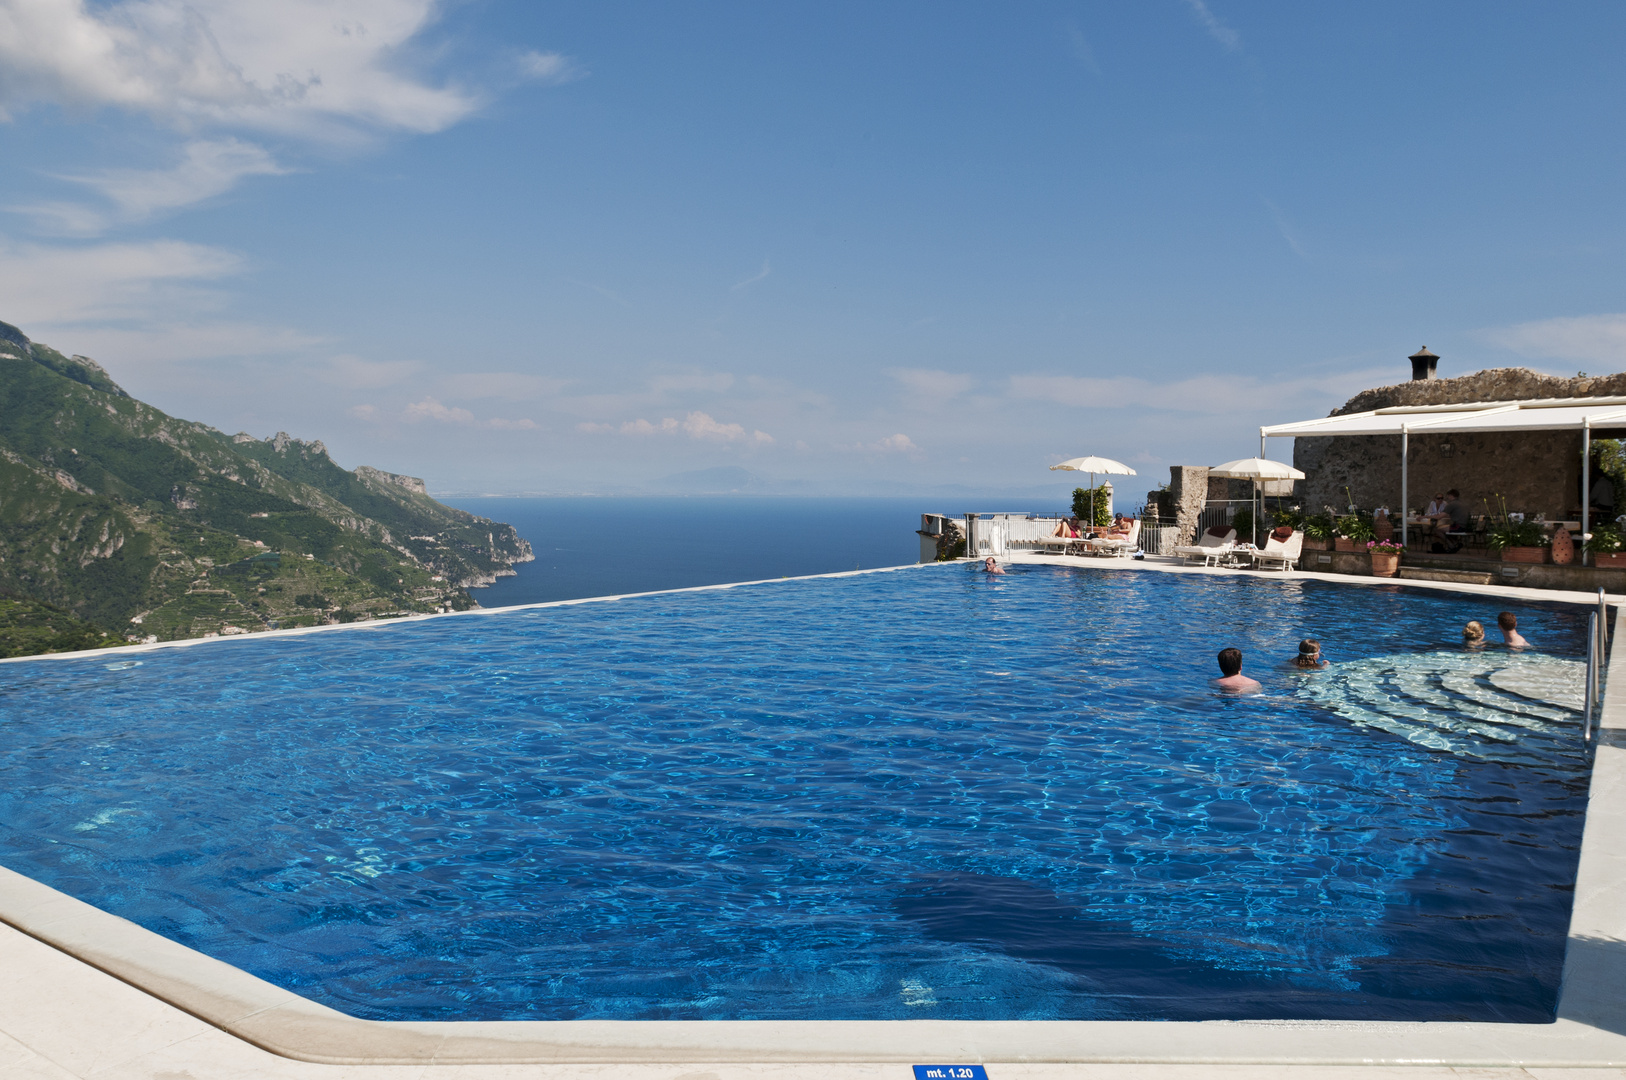 Der Infinity Pool des Hotels Caruso in Ravello